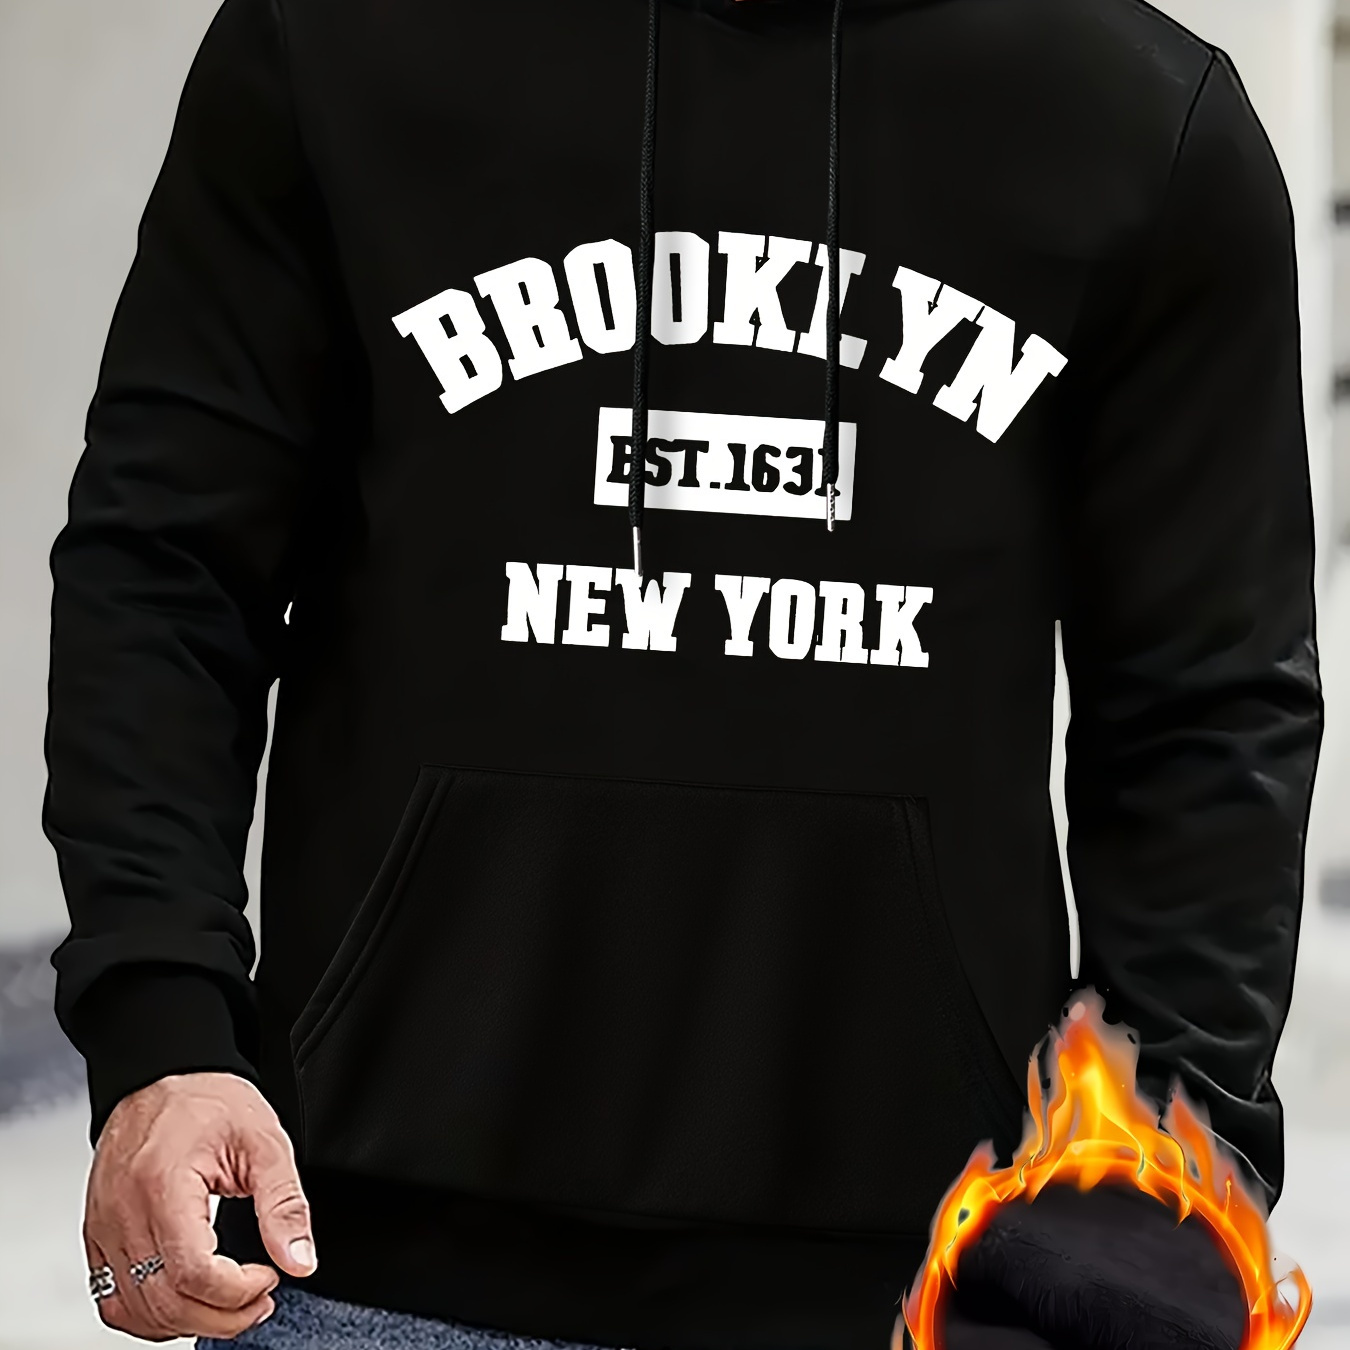 

Brooklyn New York Print Sweatshirt, Men's Fleece Long Sleeve Hoodies Street Casual Sports And Fashionable With Kangaroo Pocket, For Outdoor Sports, For Autumn Winter, Warm And Cozy